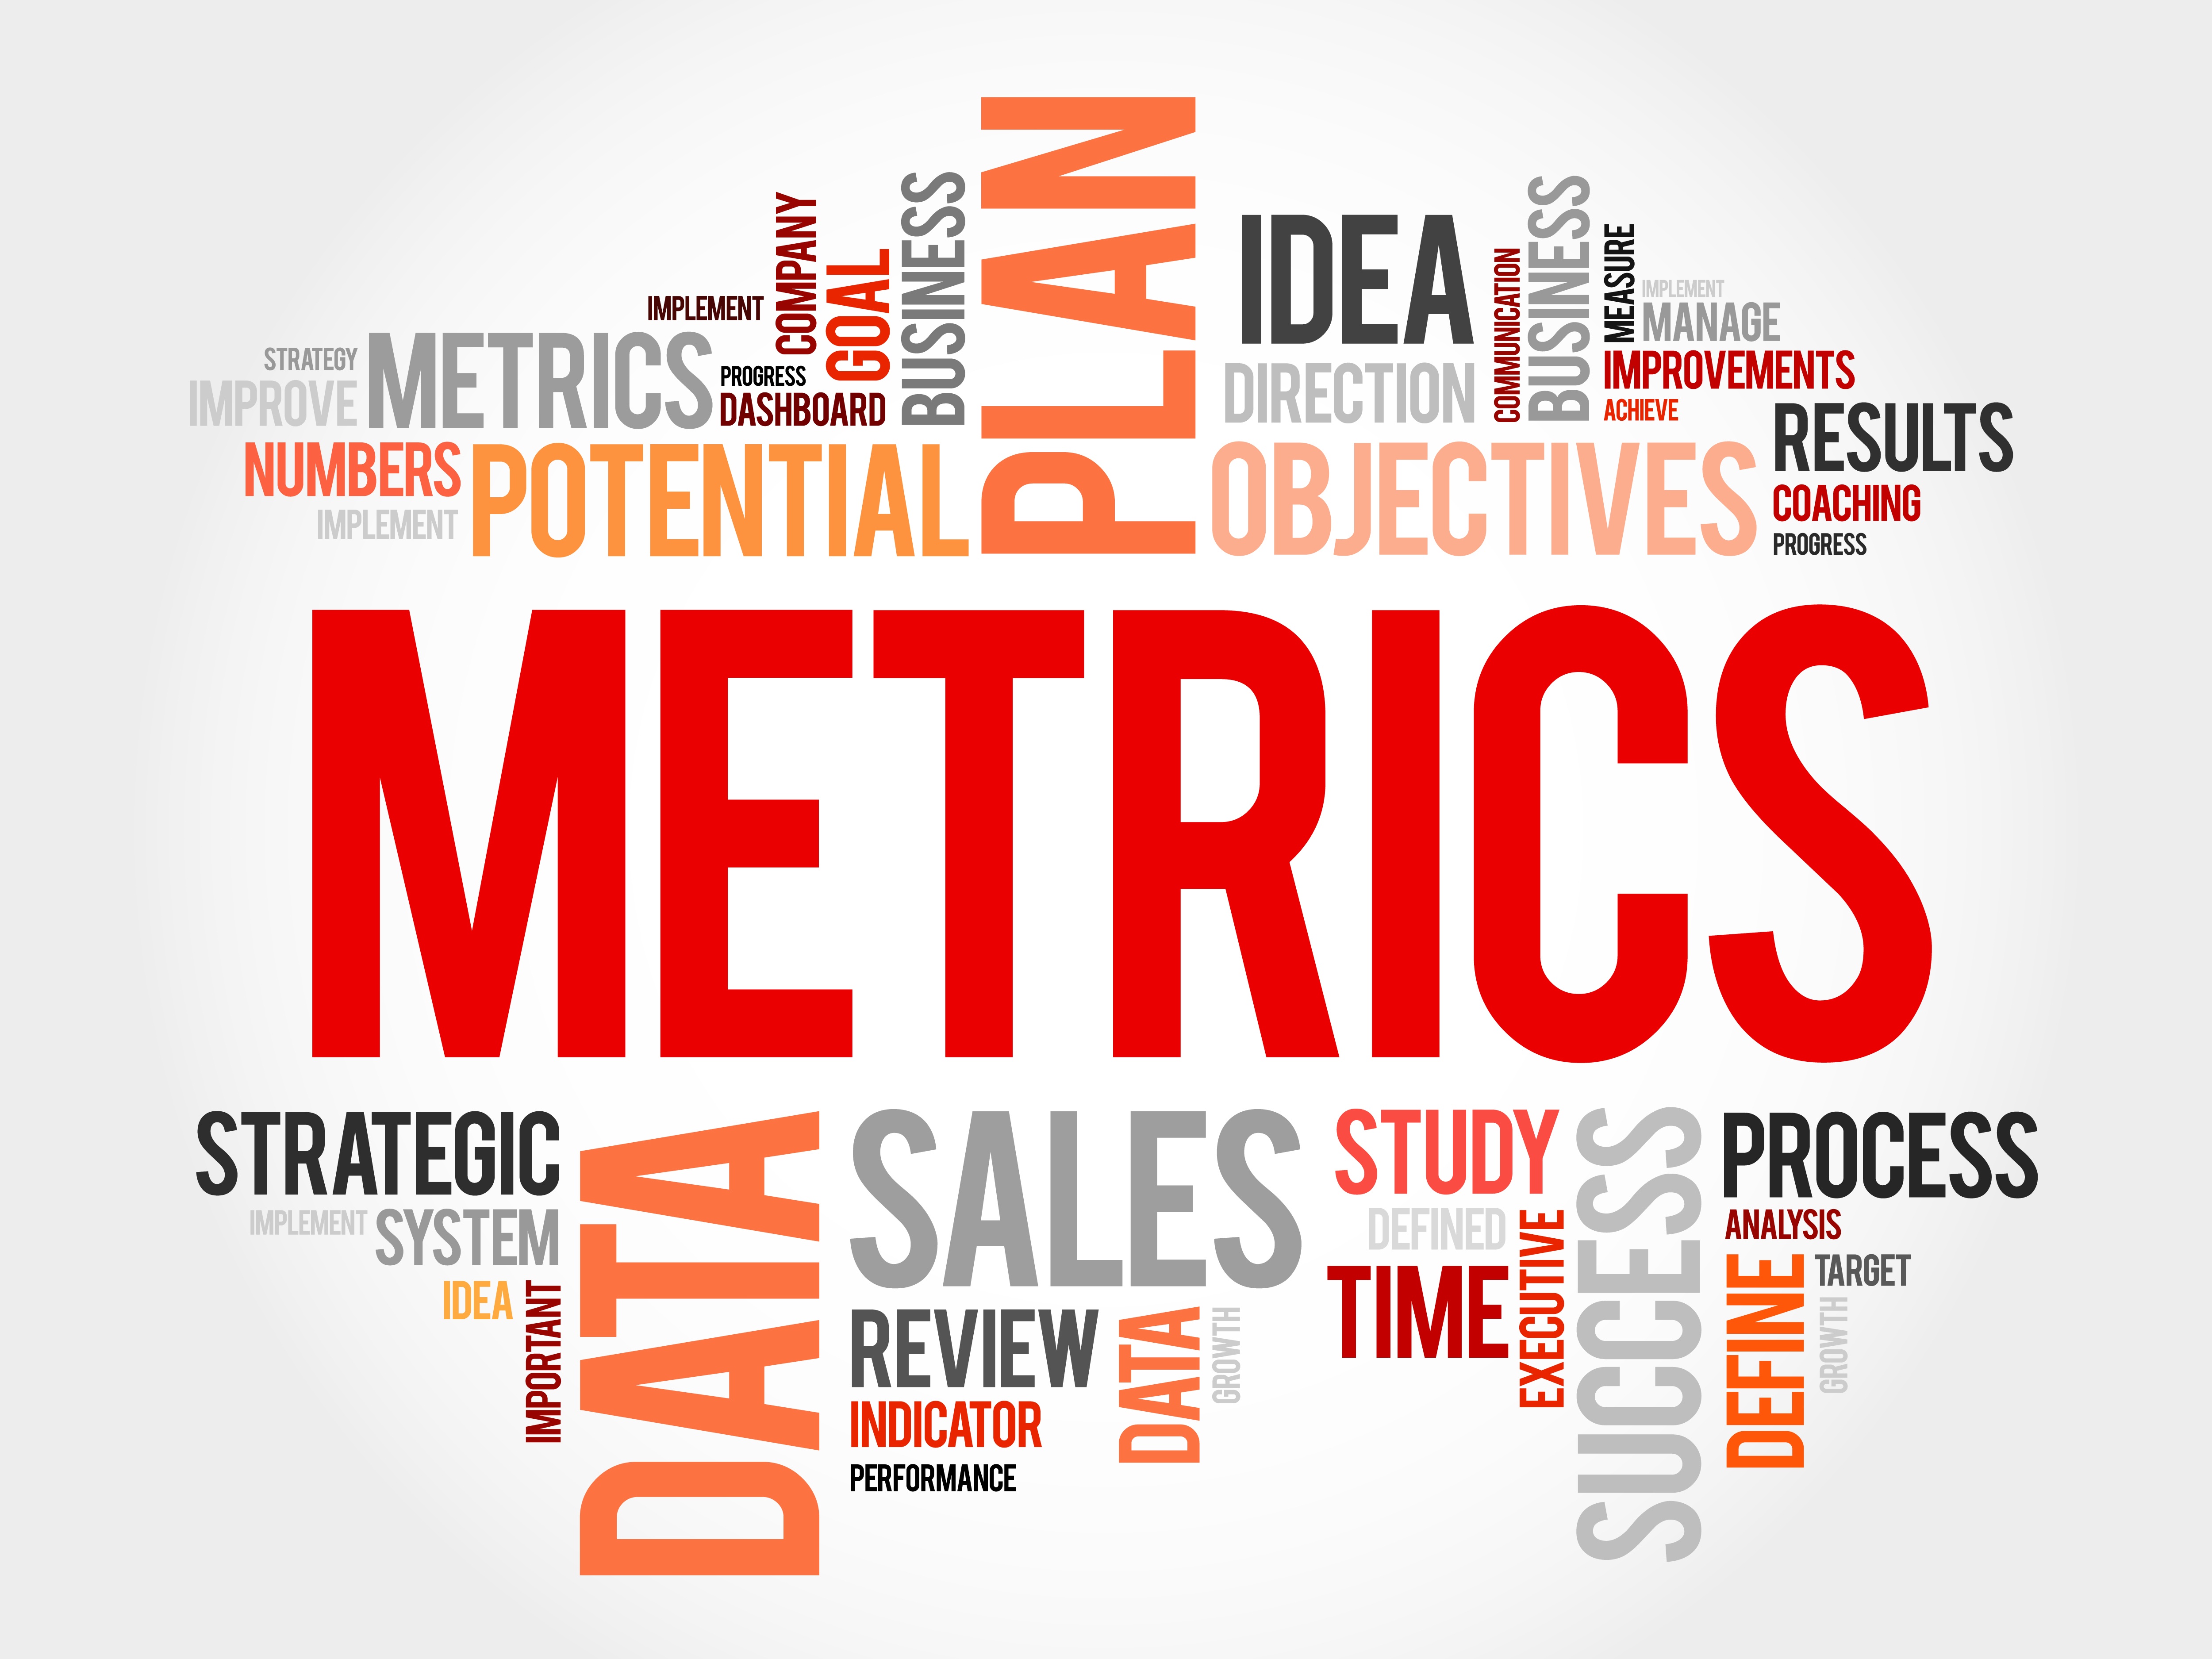 How Metric Hierarchies Affect ROI